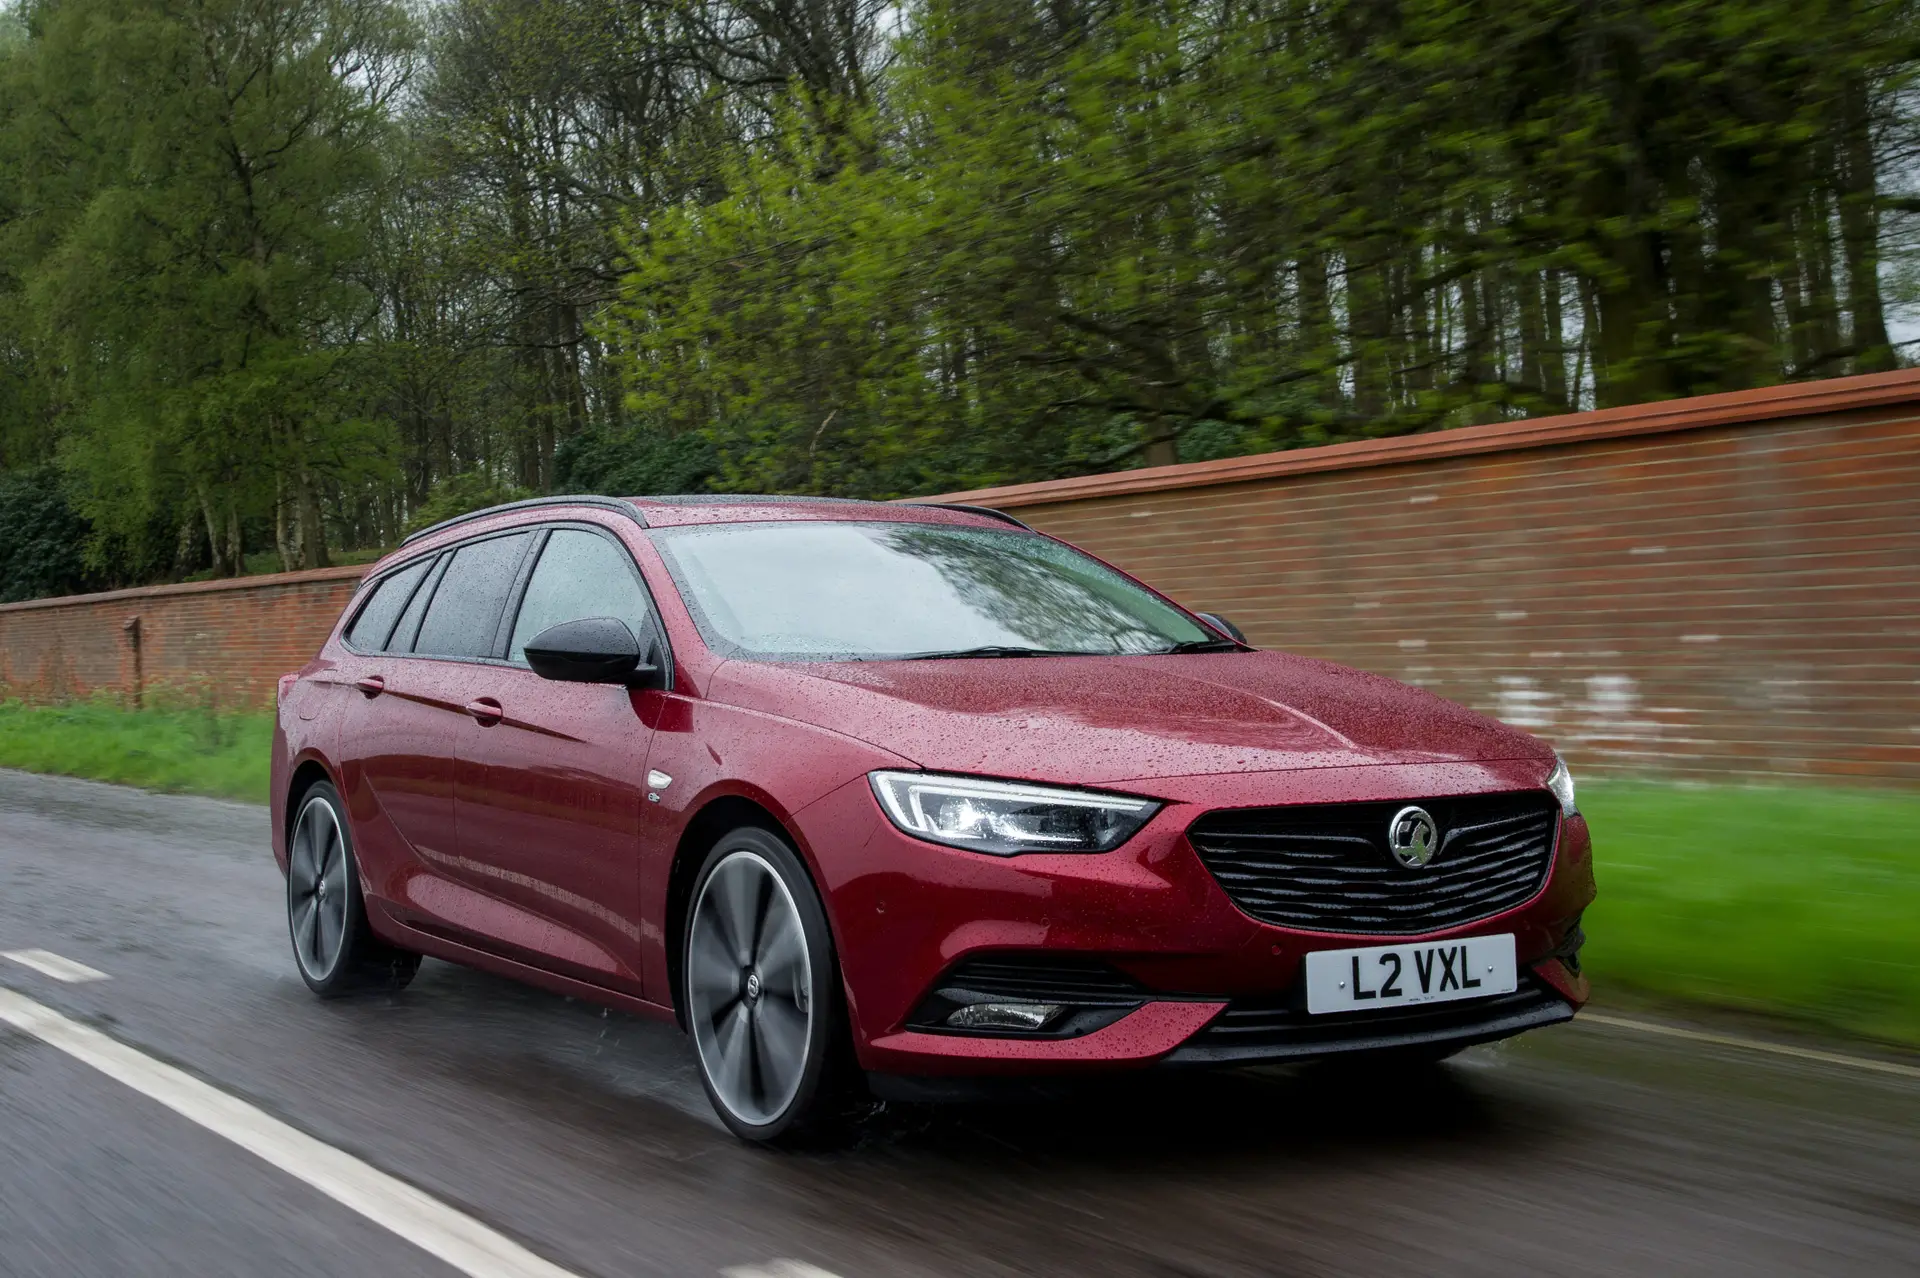 Used Vauxhall Insignia Sports Tourer (2017-2019) Review: exterior front three quarter photo of the Vauxhall Insignia Sports Tourer on the road